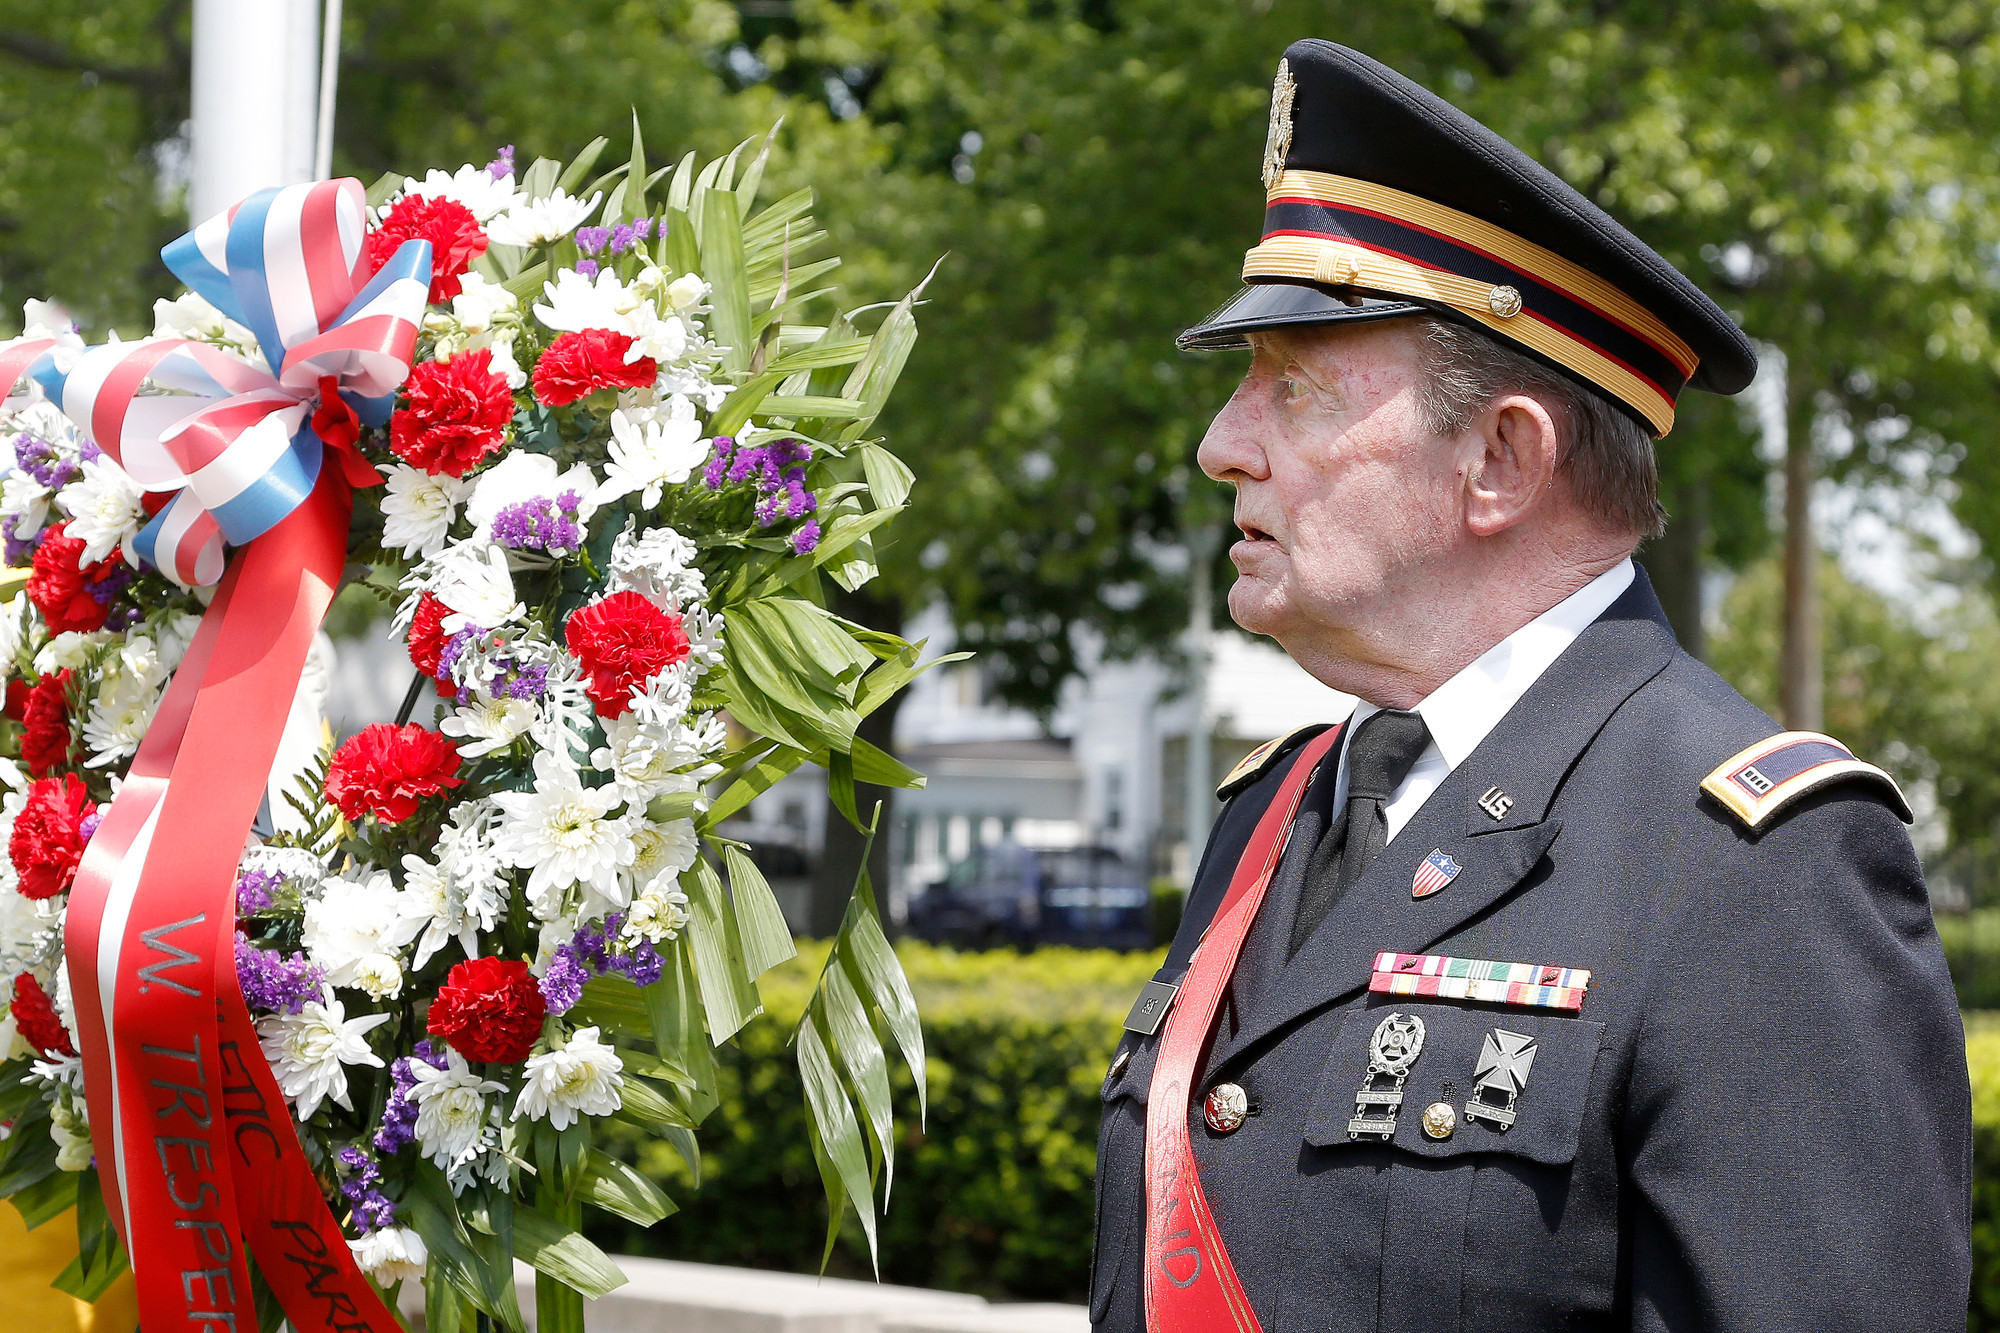 Thousands of community members joined local veterans, including Chief Warrant Officer 4 Edward Grant, to celebrate and pay tribute at Monday’s East Meadow Memorial Day Parade. Grant was the grand marshal.